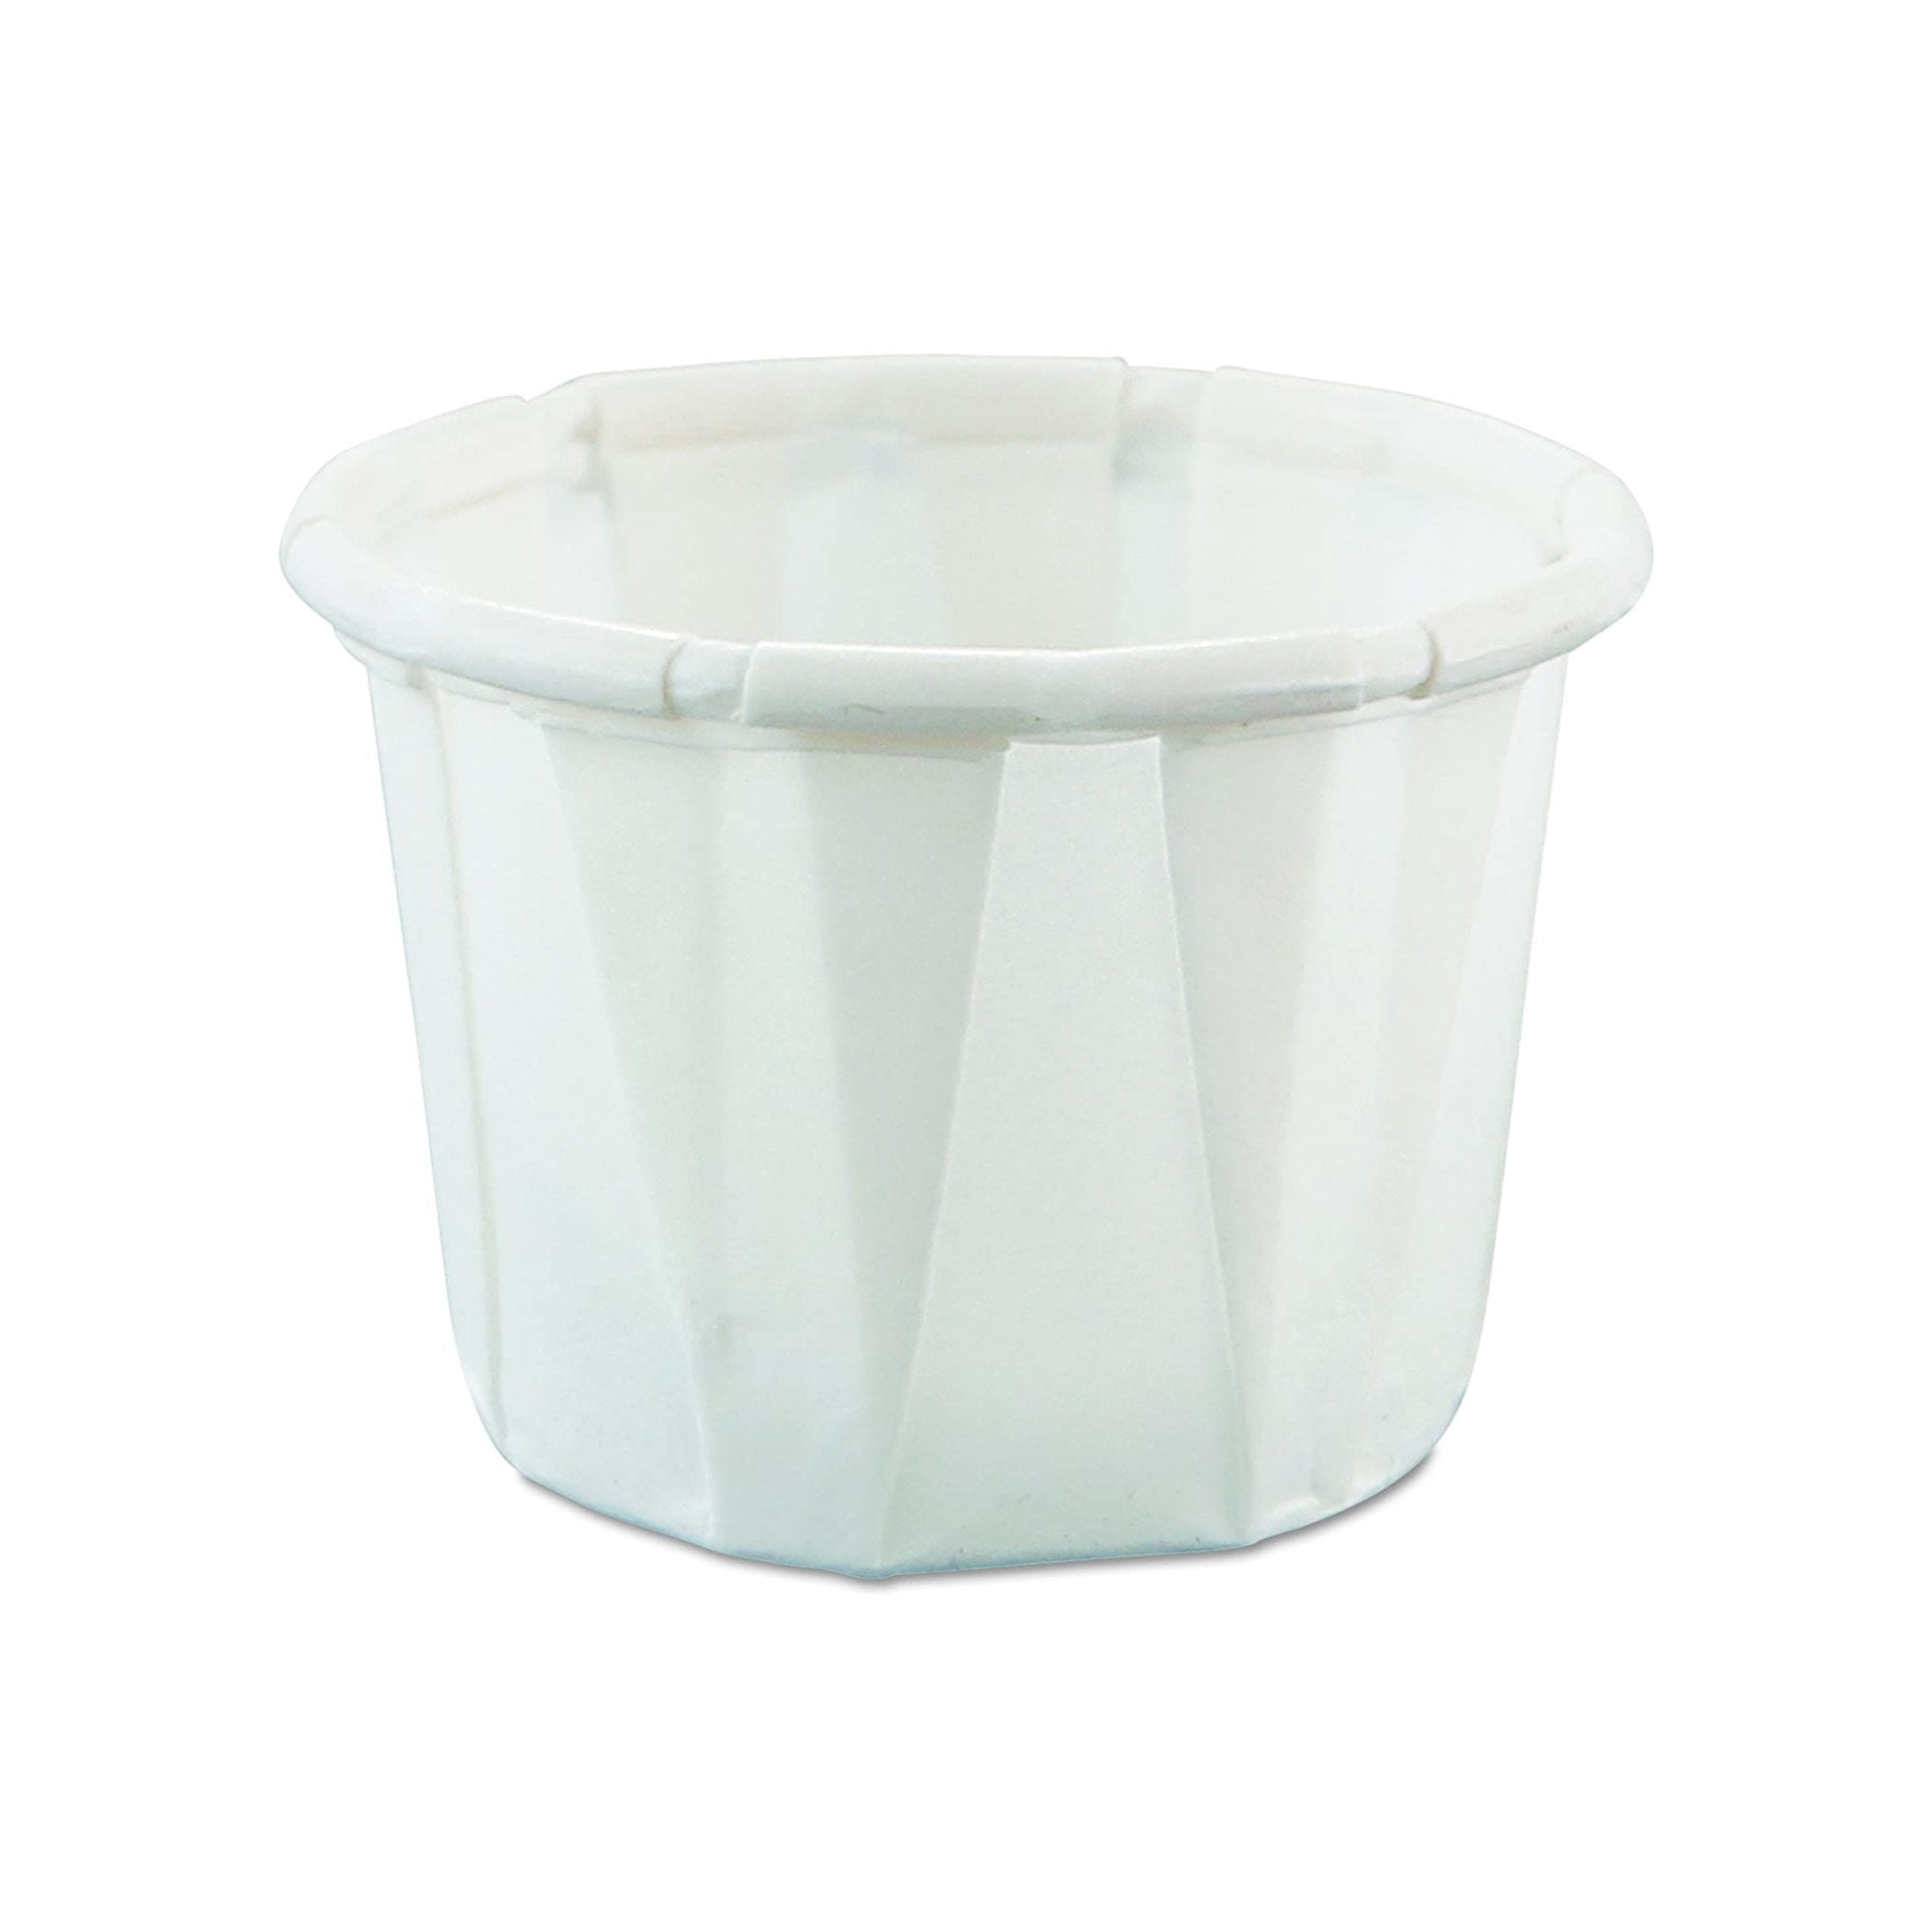 Medline Disposable Plastic Drinking Cup 3.5oz 100Ct